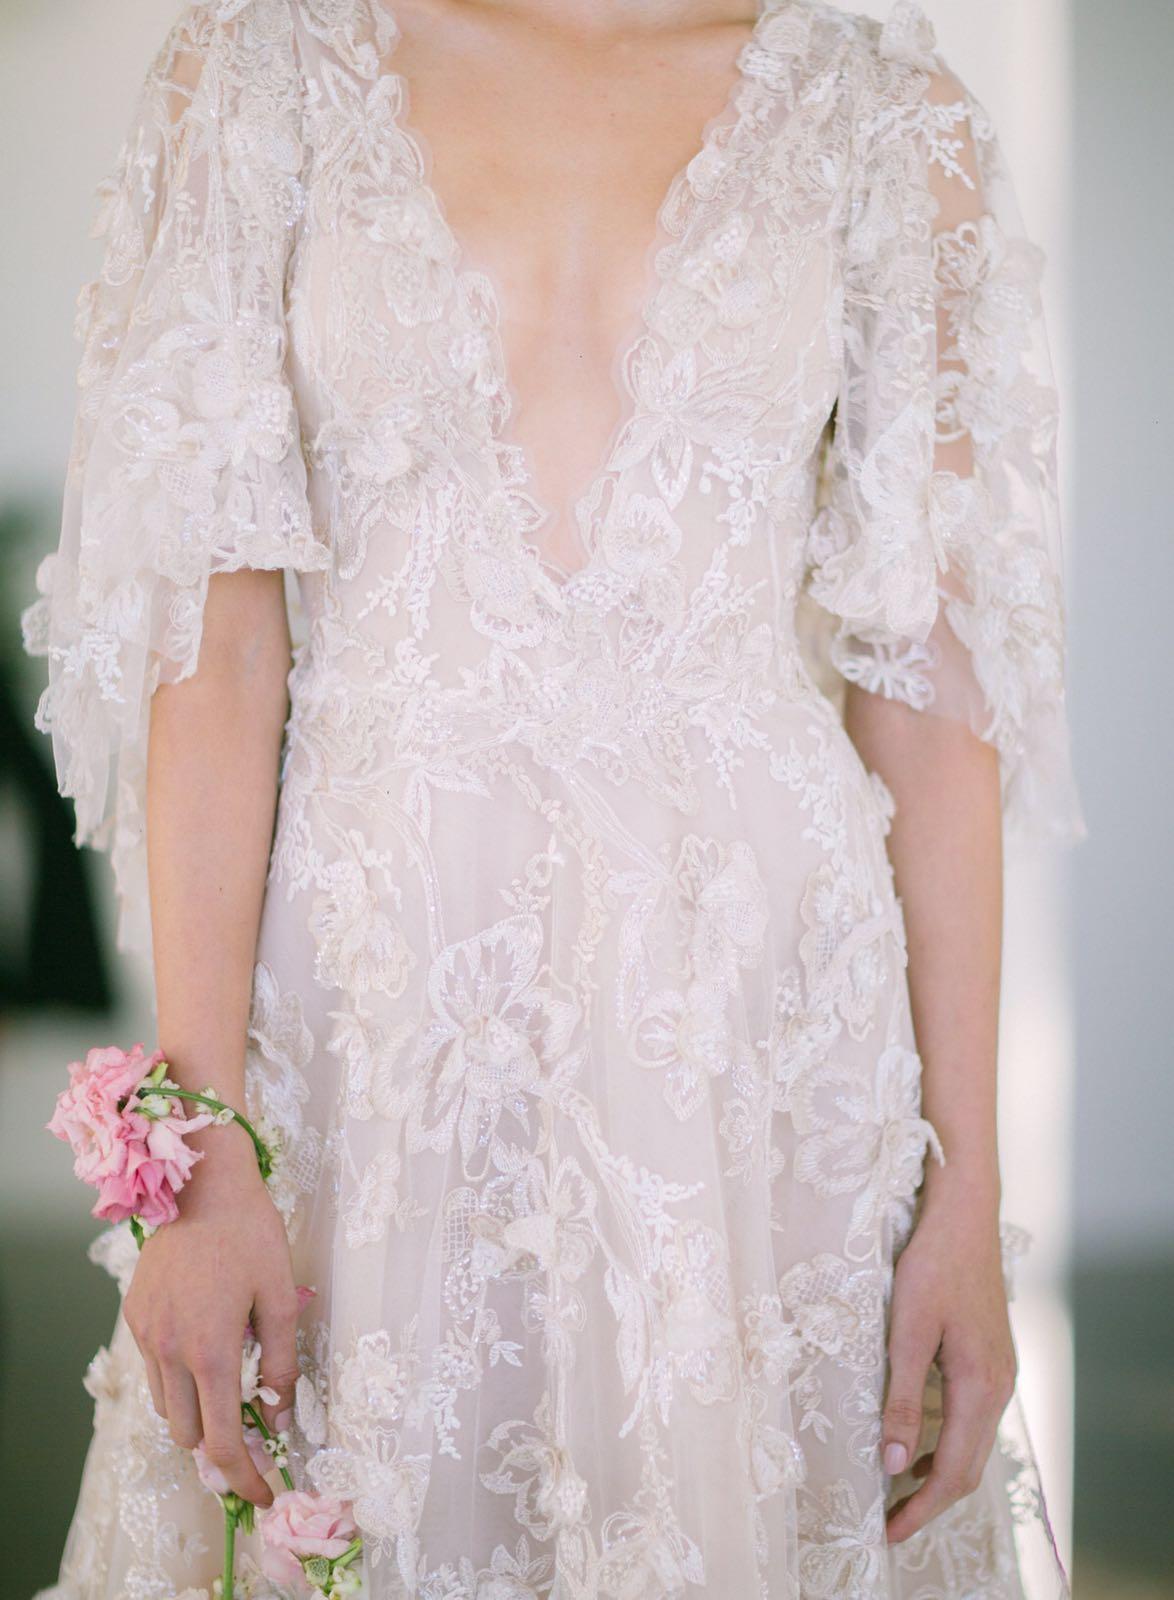 Marchesa's New Wedding Dresses Will Turn Any Bride Into a Goddess